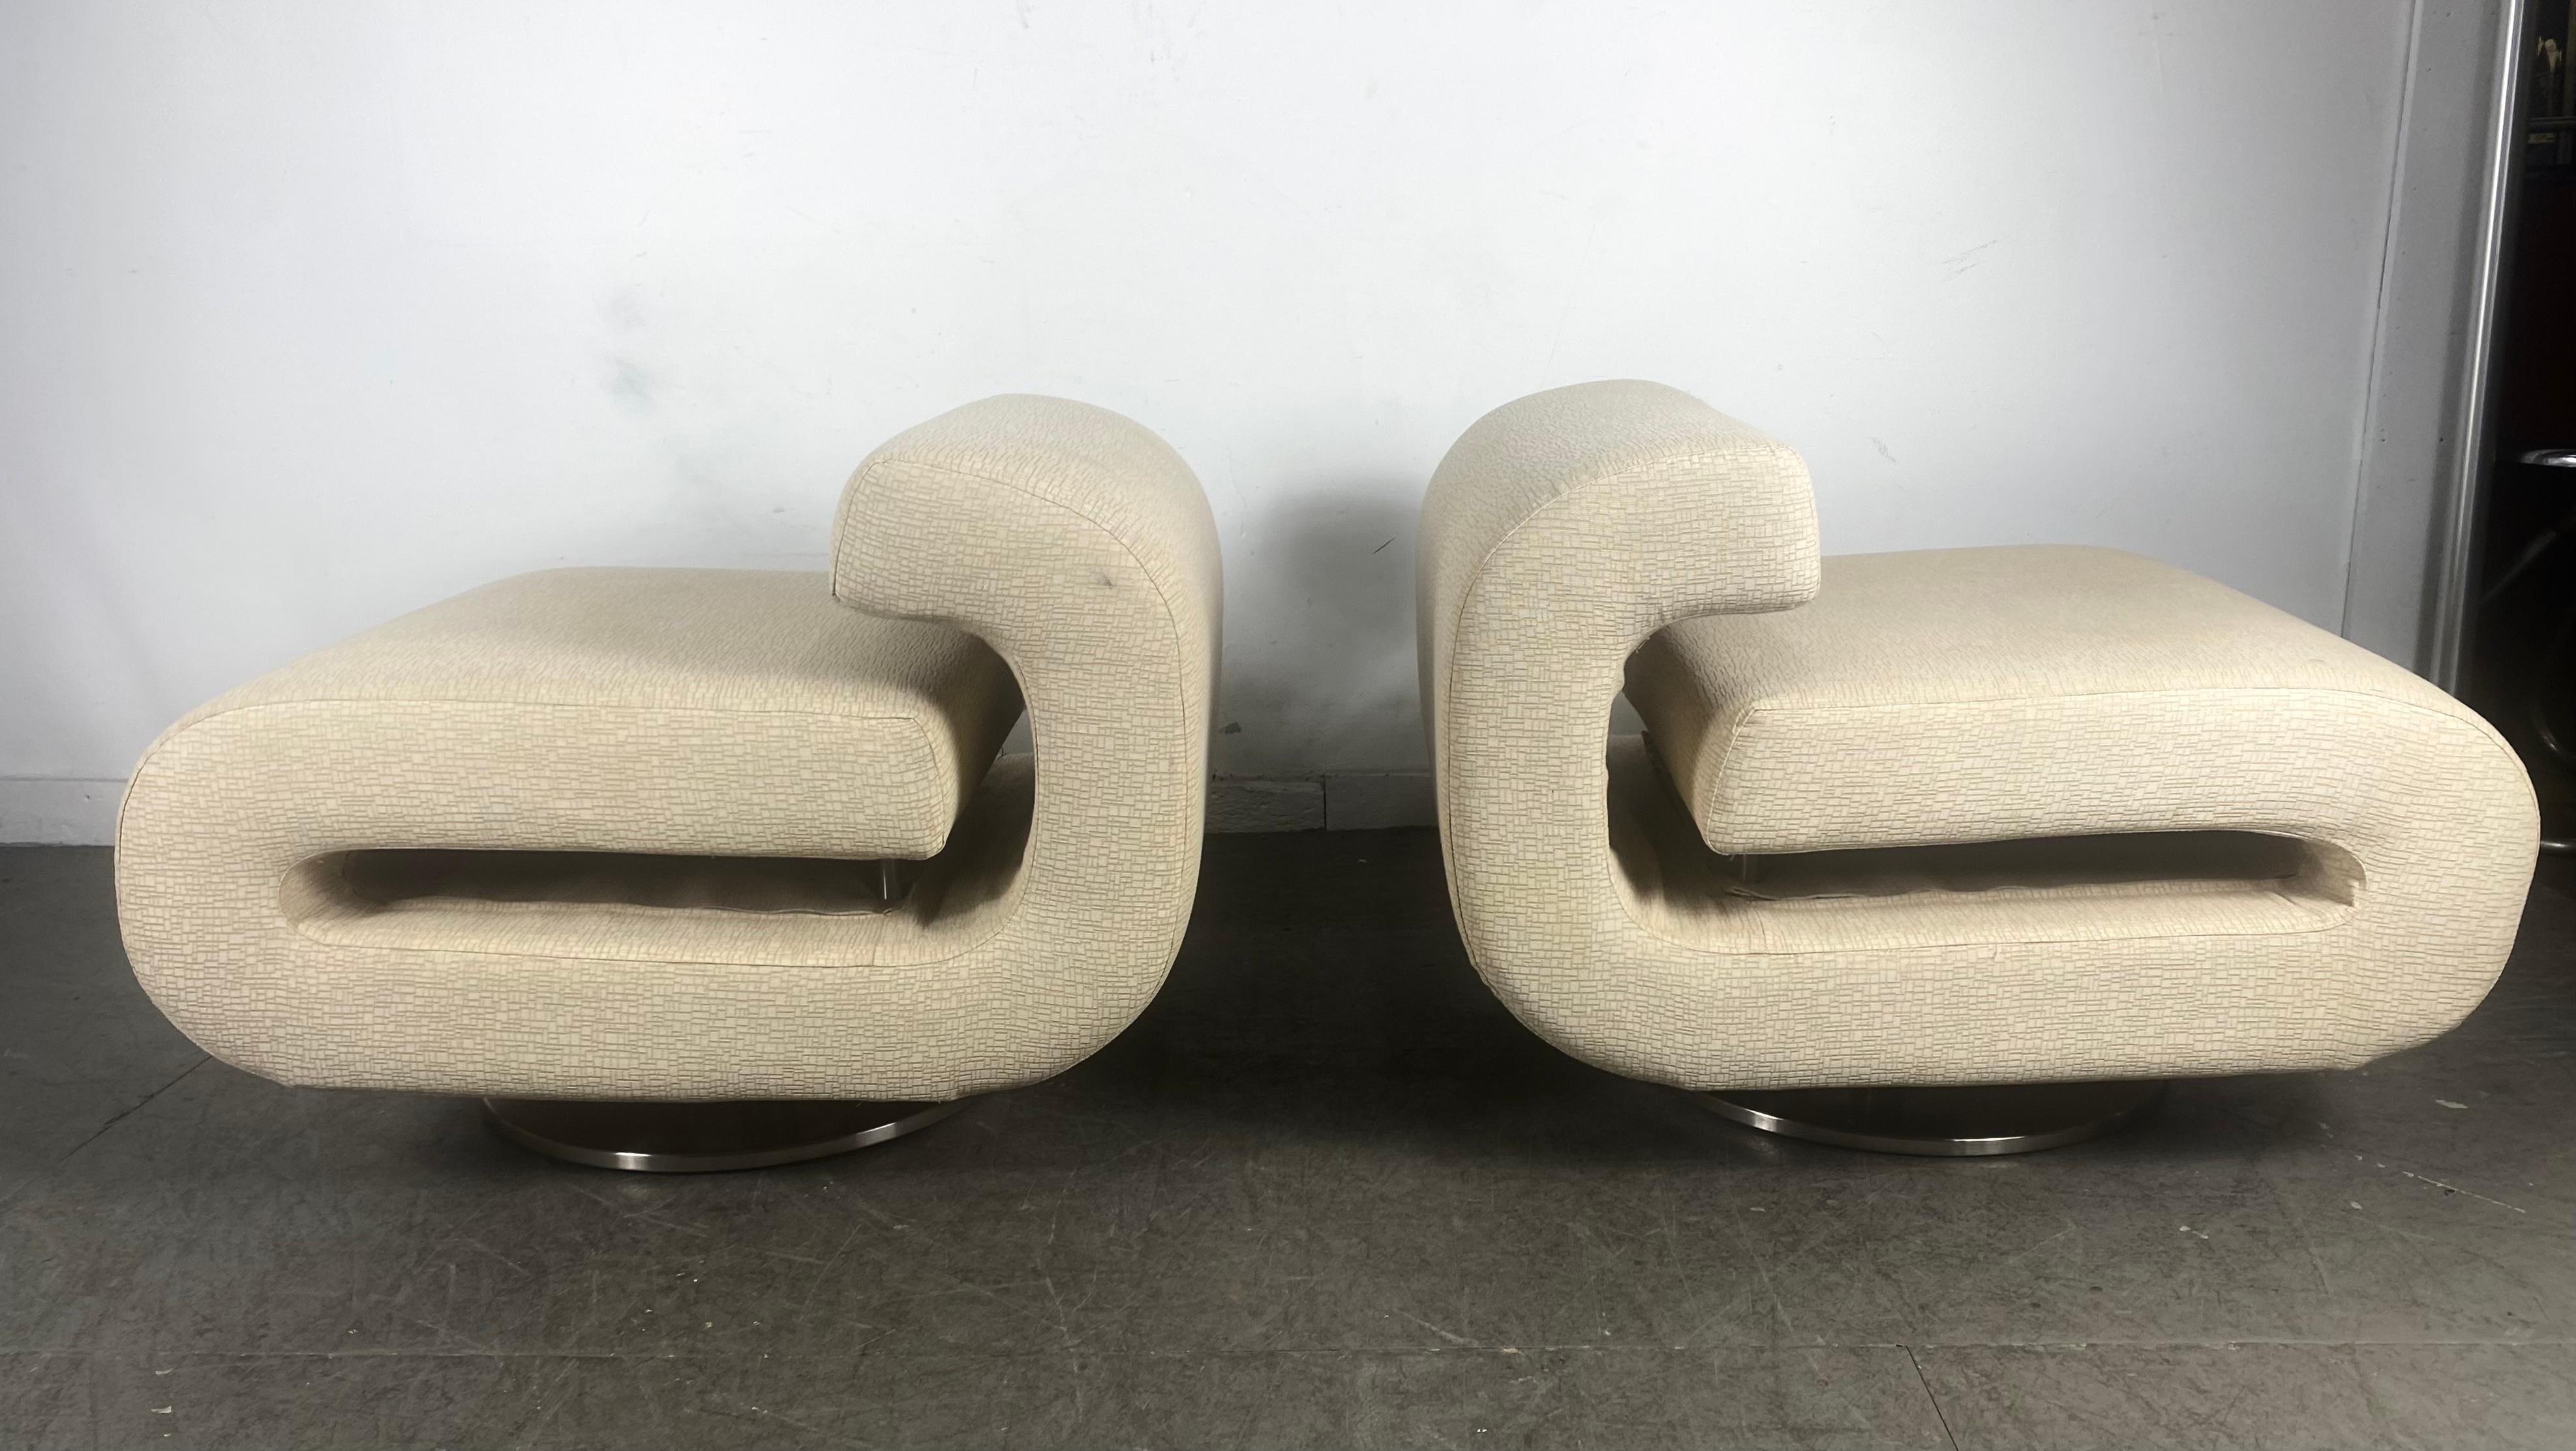 Space Age Contemporary Modernist 3-piece seating manner of Etienne Henri Martin